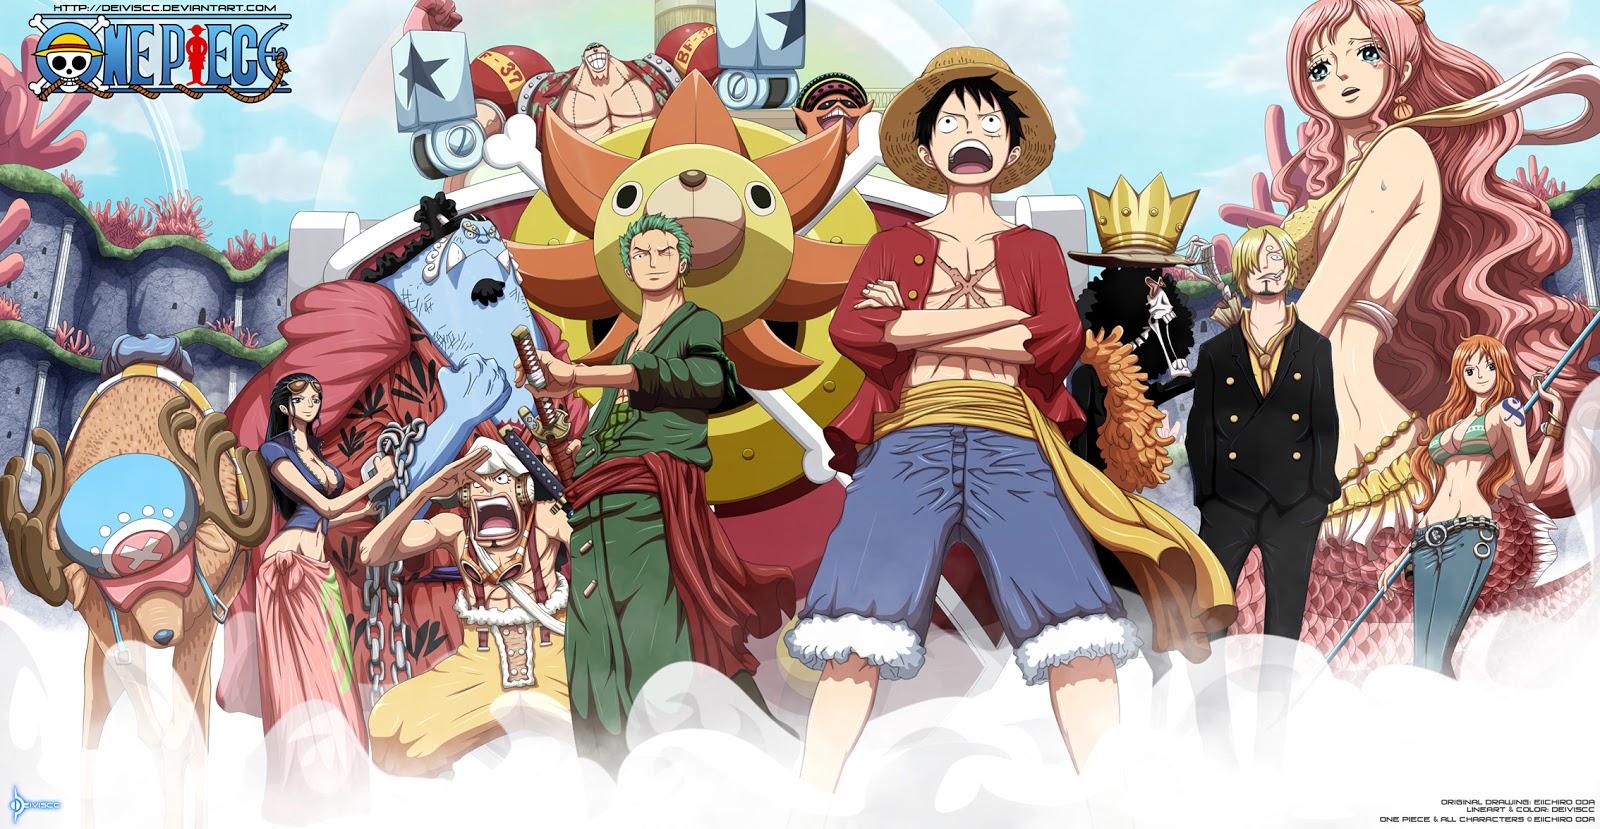 Anime Manga Heaven One Piece Episode 787 English Sub Online And Download